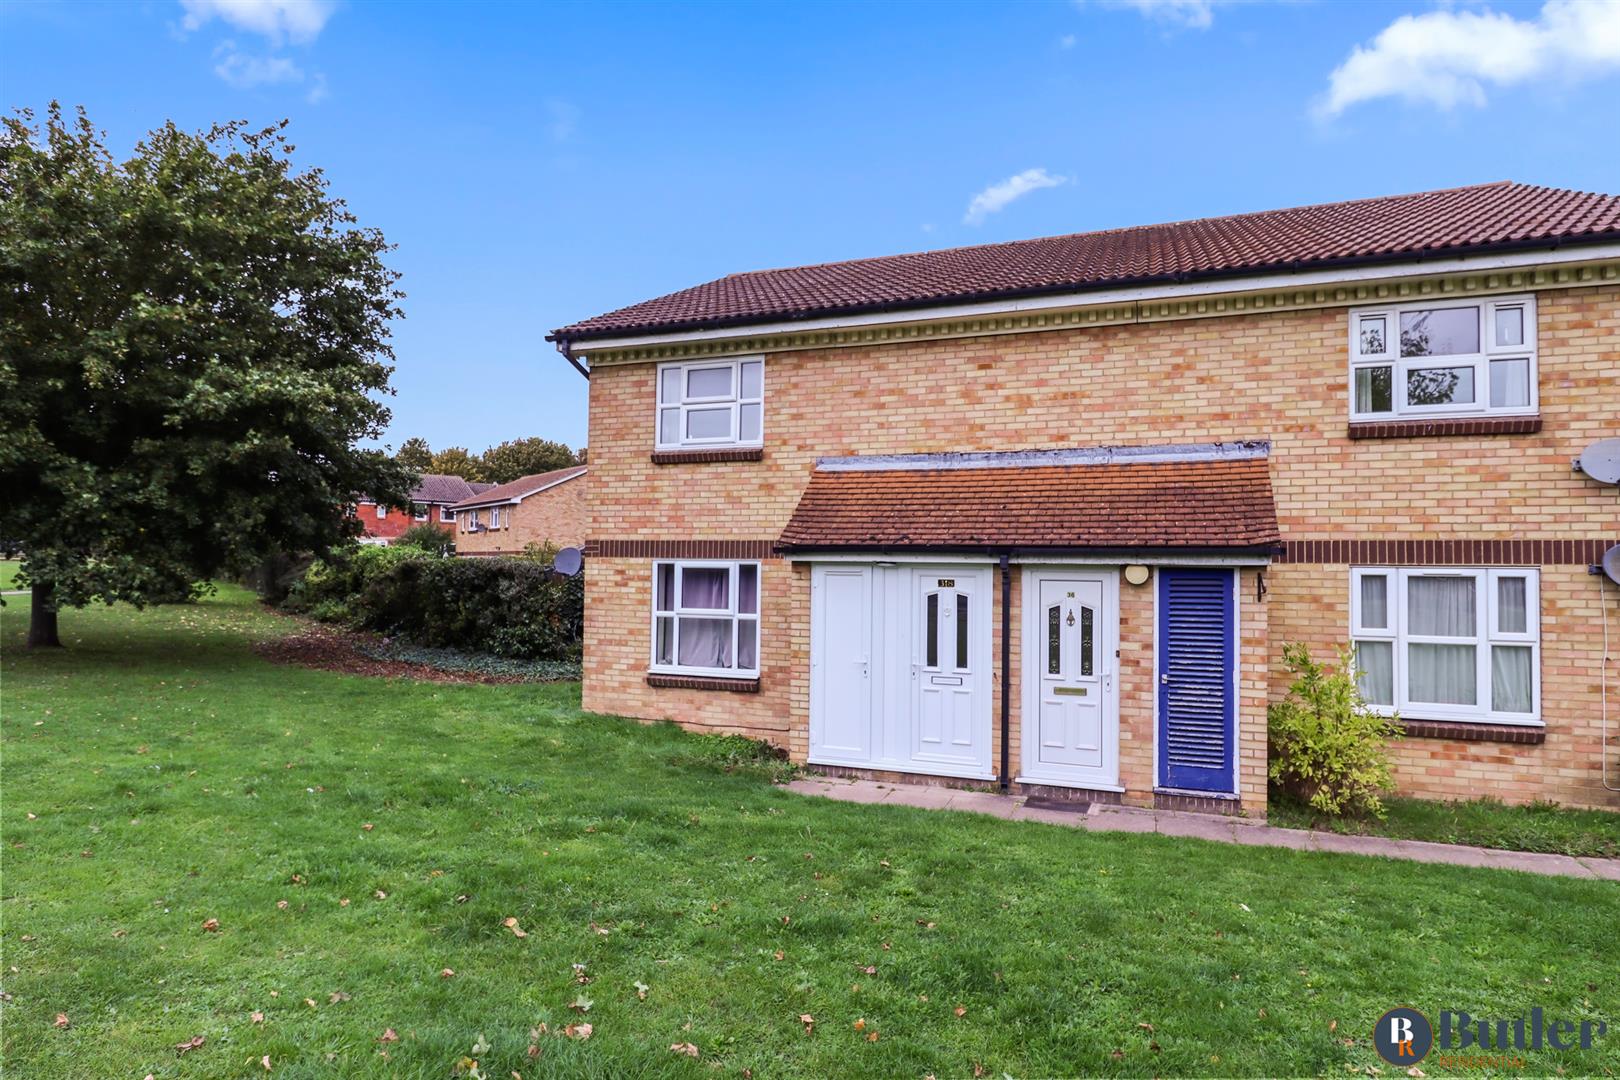 1 bed maisonette for sale in Iredale View, Baldock - Property Image 1